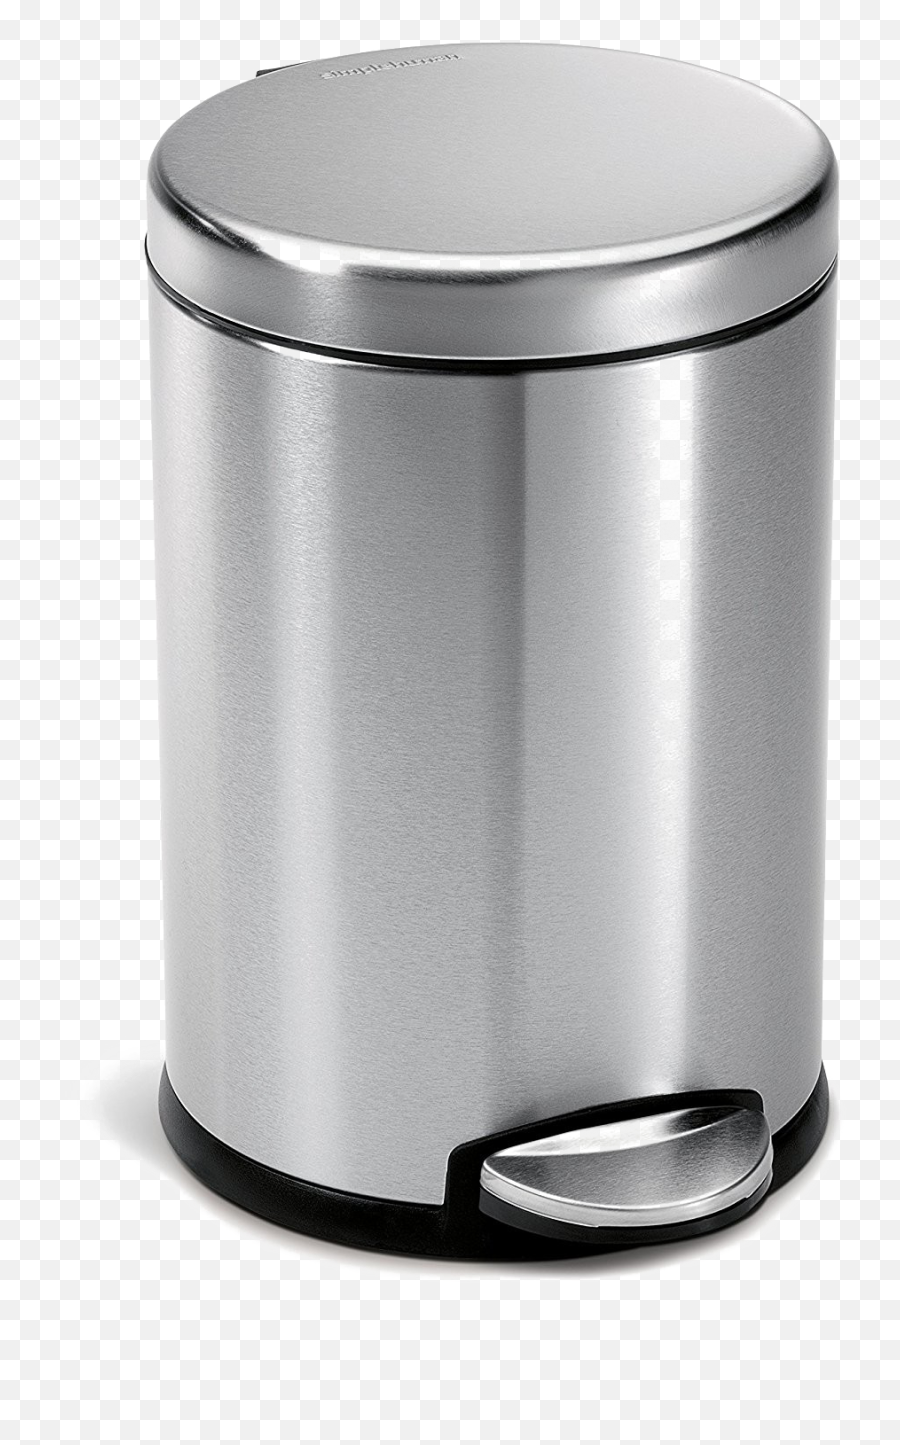 Trash Can Png High - Stainless Steel Trash Bin,Trash Can Transparent Background